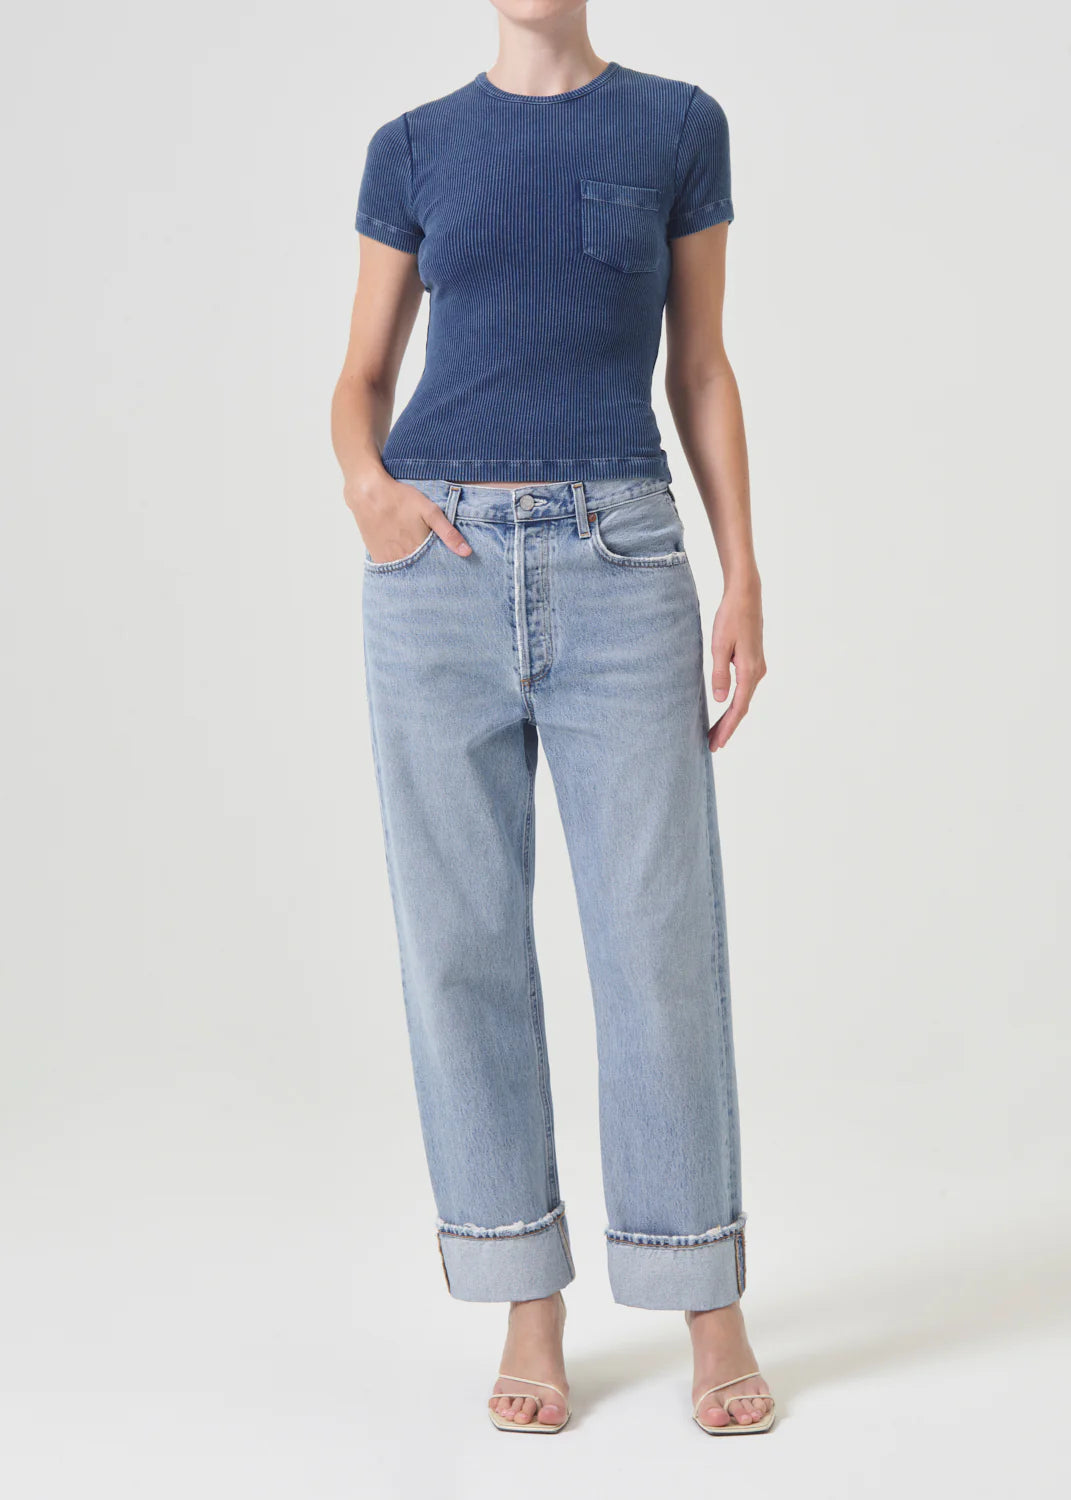 The model is wearing AGOLDE Fran Low Slung Straight - Force jeans and a retro-inspired blue t-shirt.